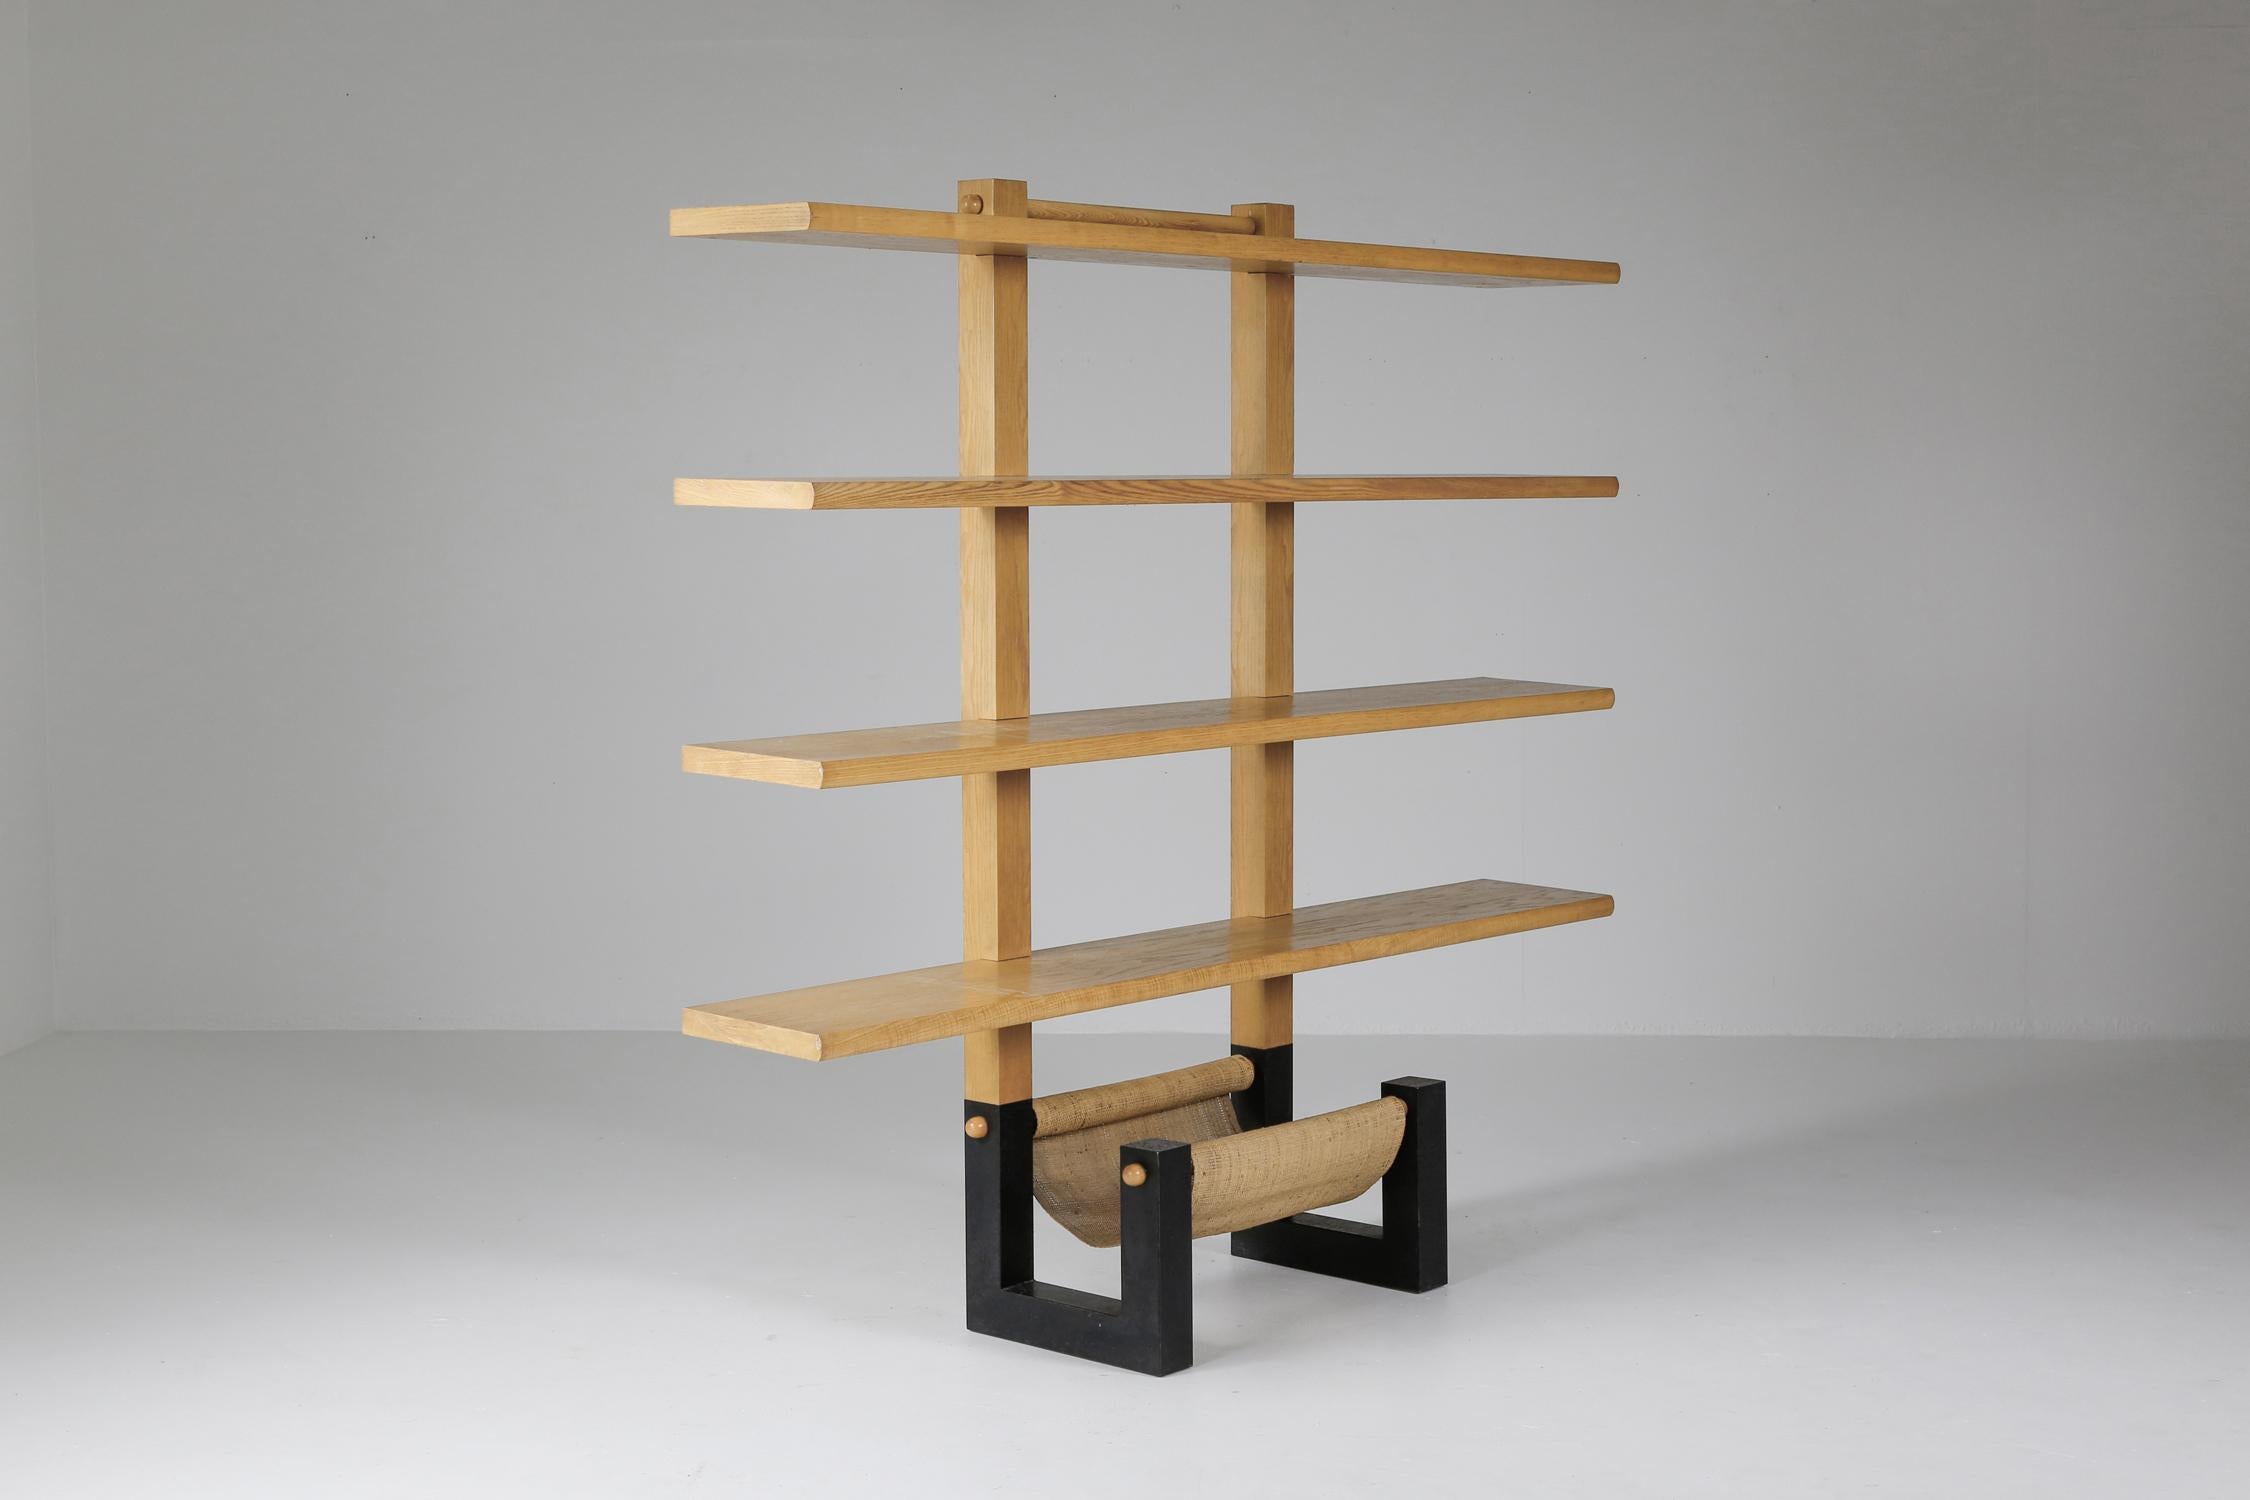 Ash shelving system, étagère, 4 adjustable shelves, Post-modern, Renato Toso, Roberto Pamio, Stilwood, Italy, 1970
Superb and unusual free standing shelves that could serve as a room divider.
This piece has some great assets which sets it apart